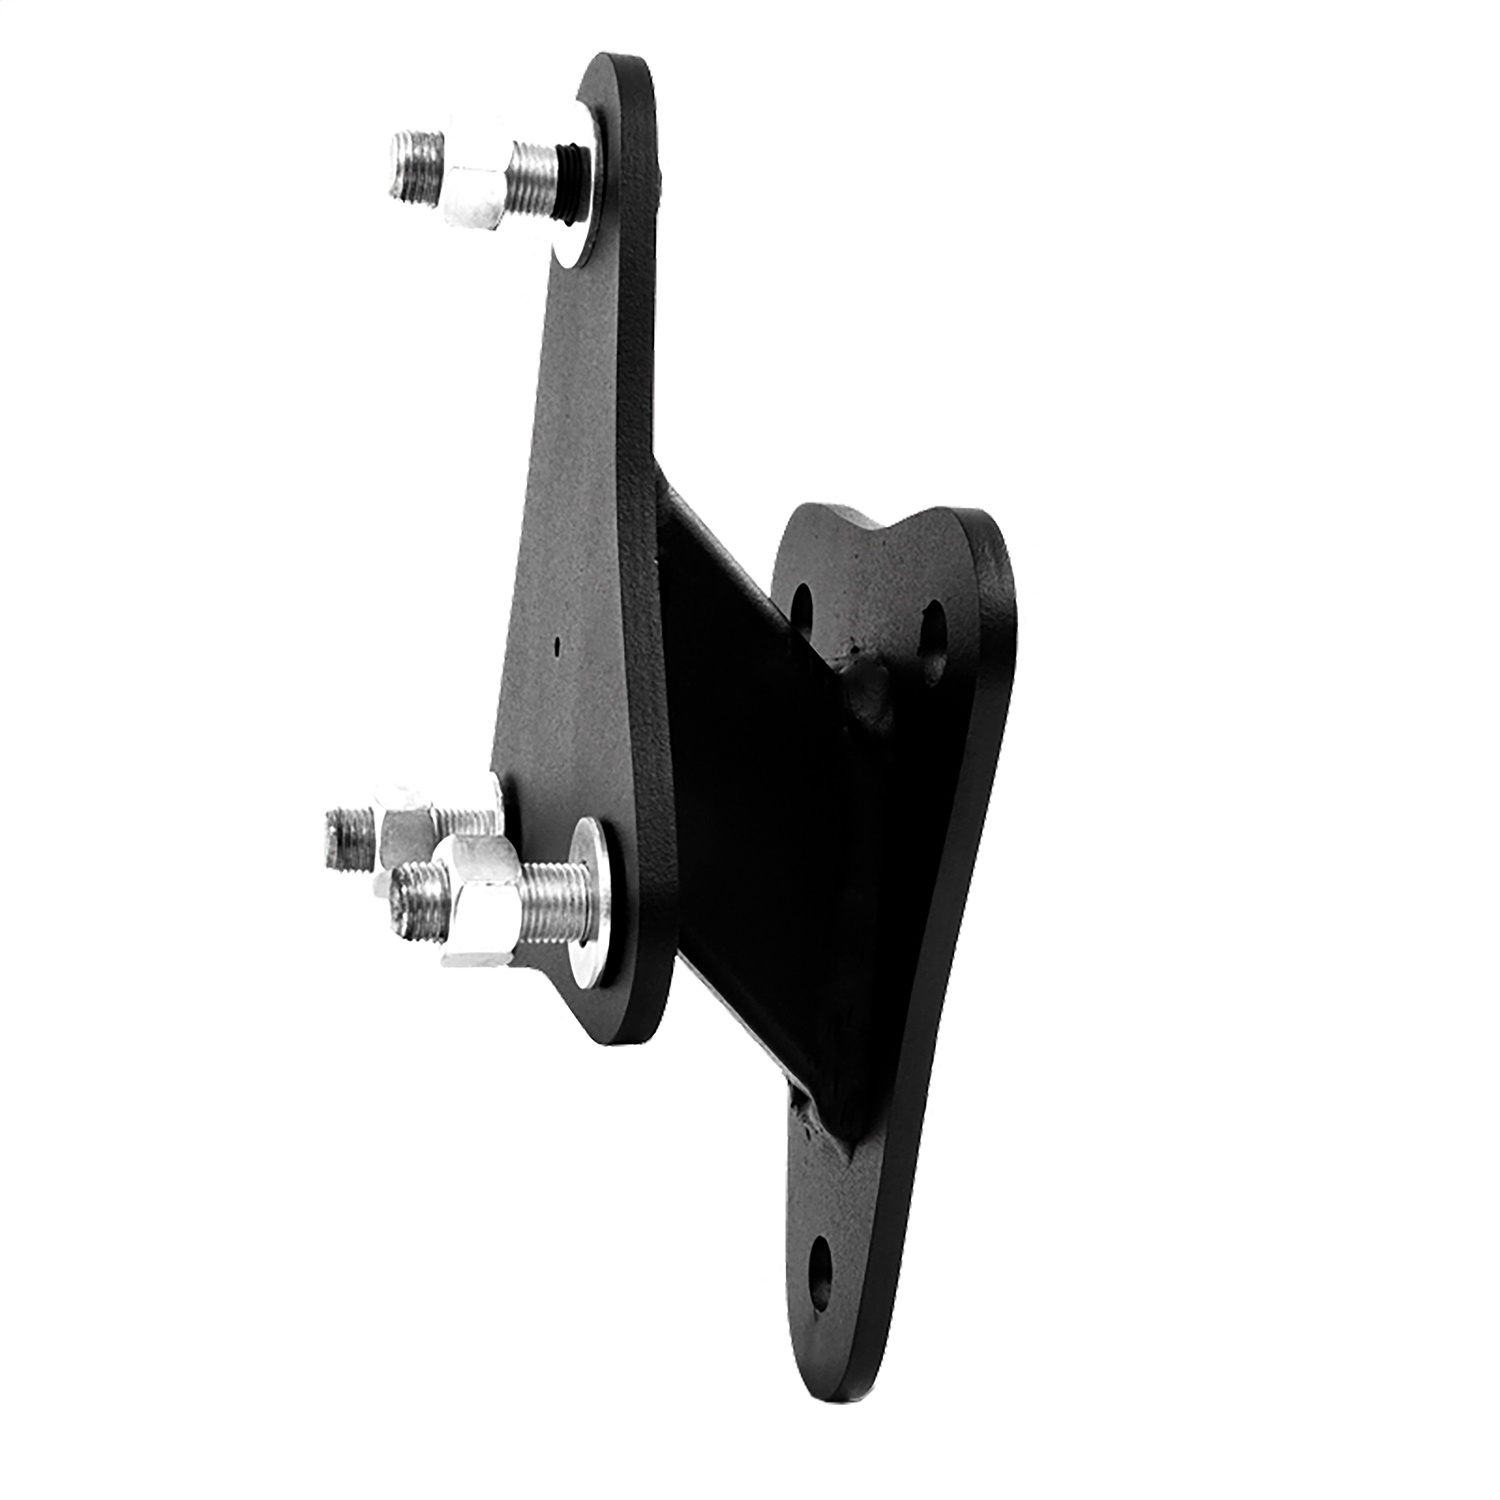 MBRP Exhaust MBRP Exhaust 130718 Spare Tire Relocate Bracket Kit Fits 07-15 Wrangler (JK)